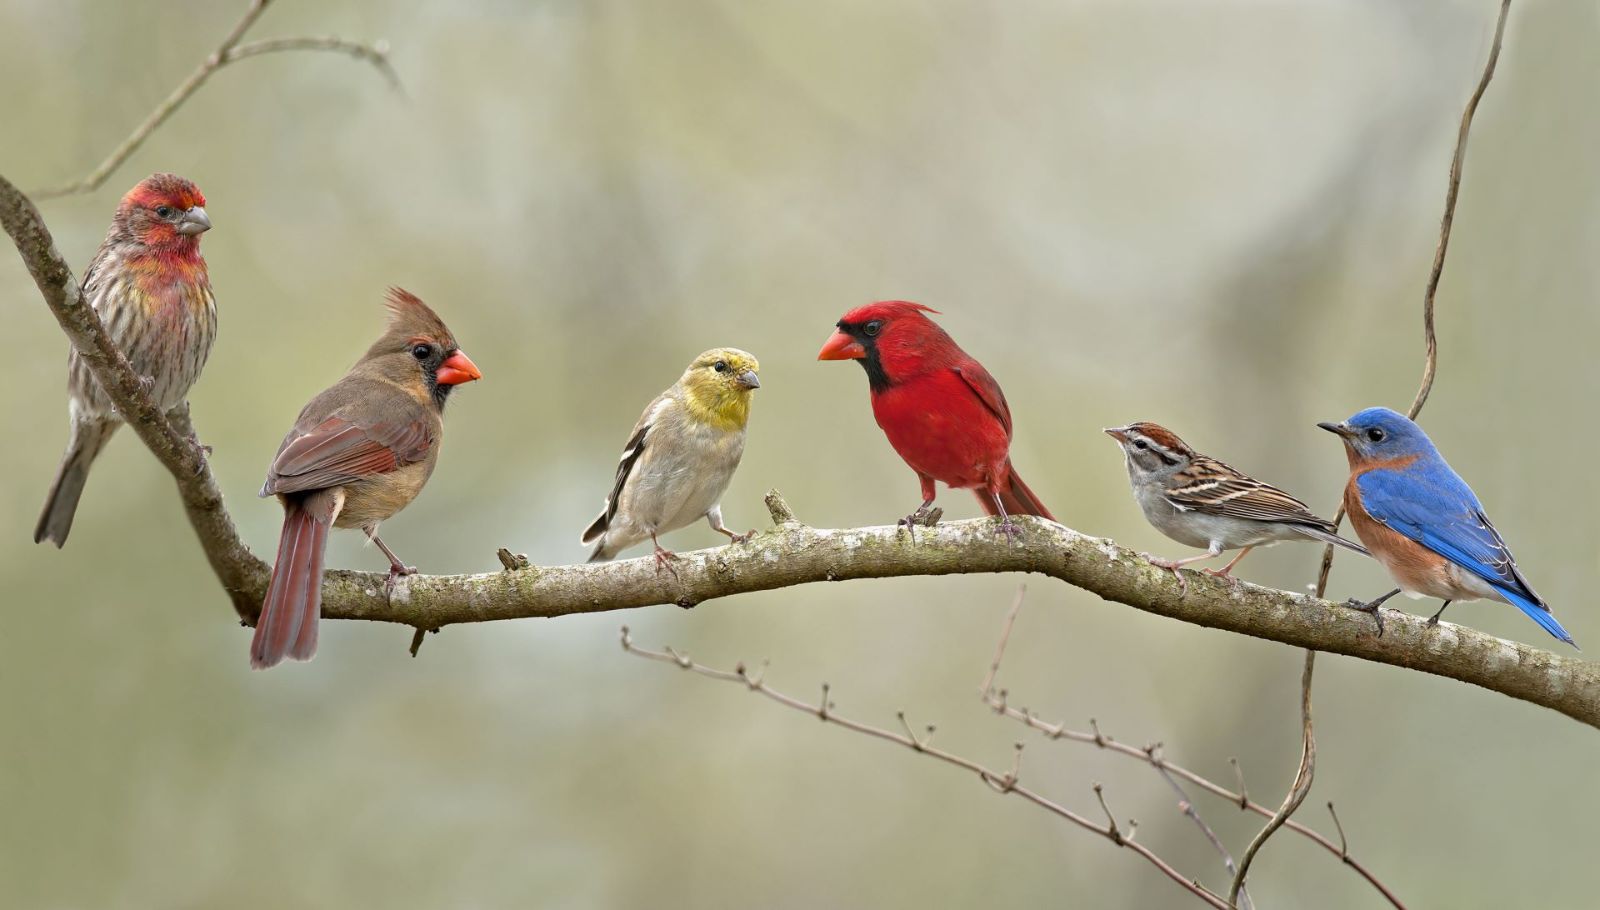 Photo: a series of colorful birds sit on a branch. Credit: Shutterstock